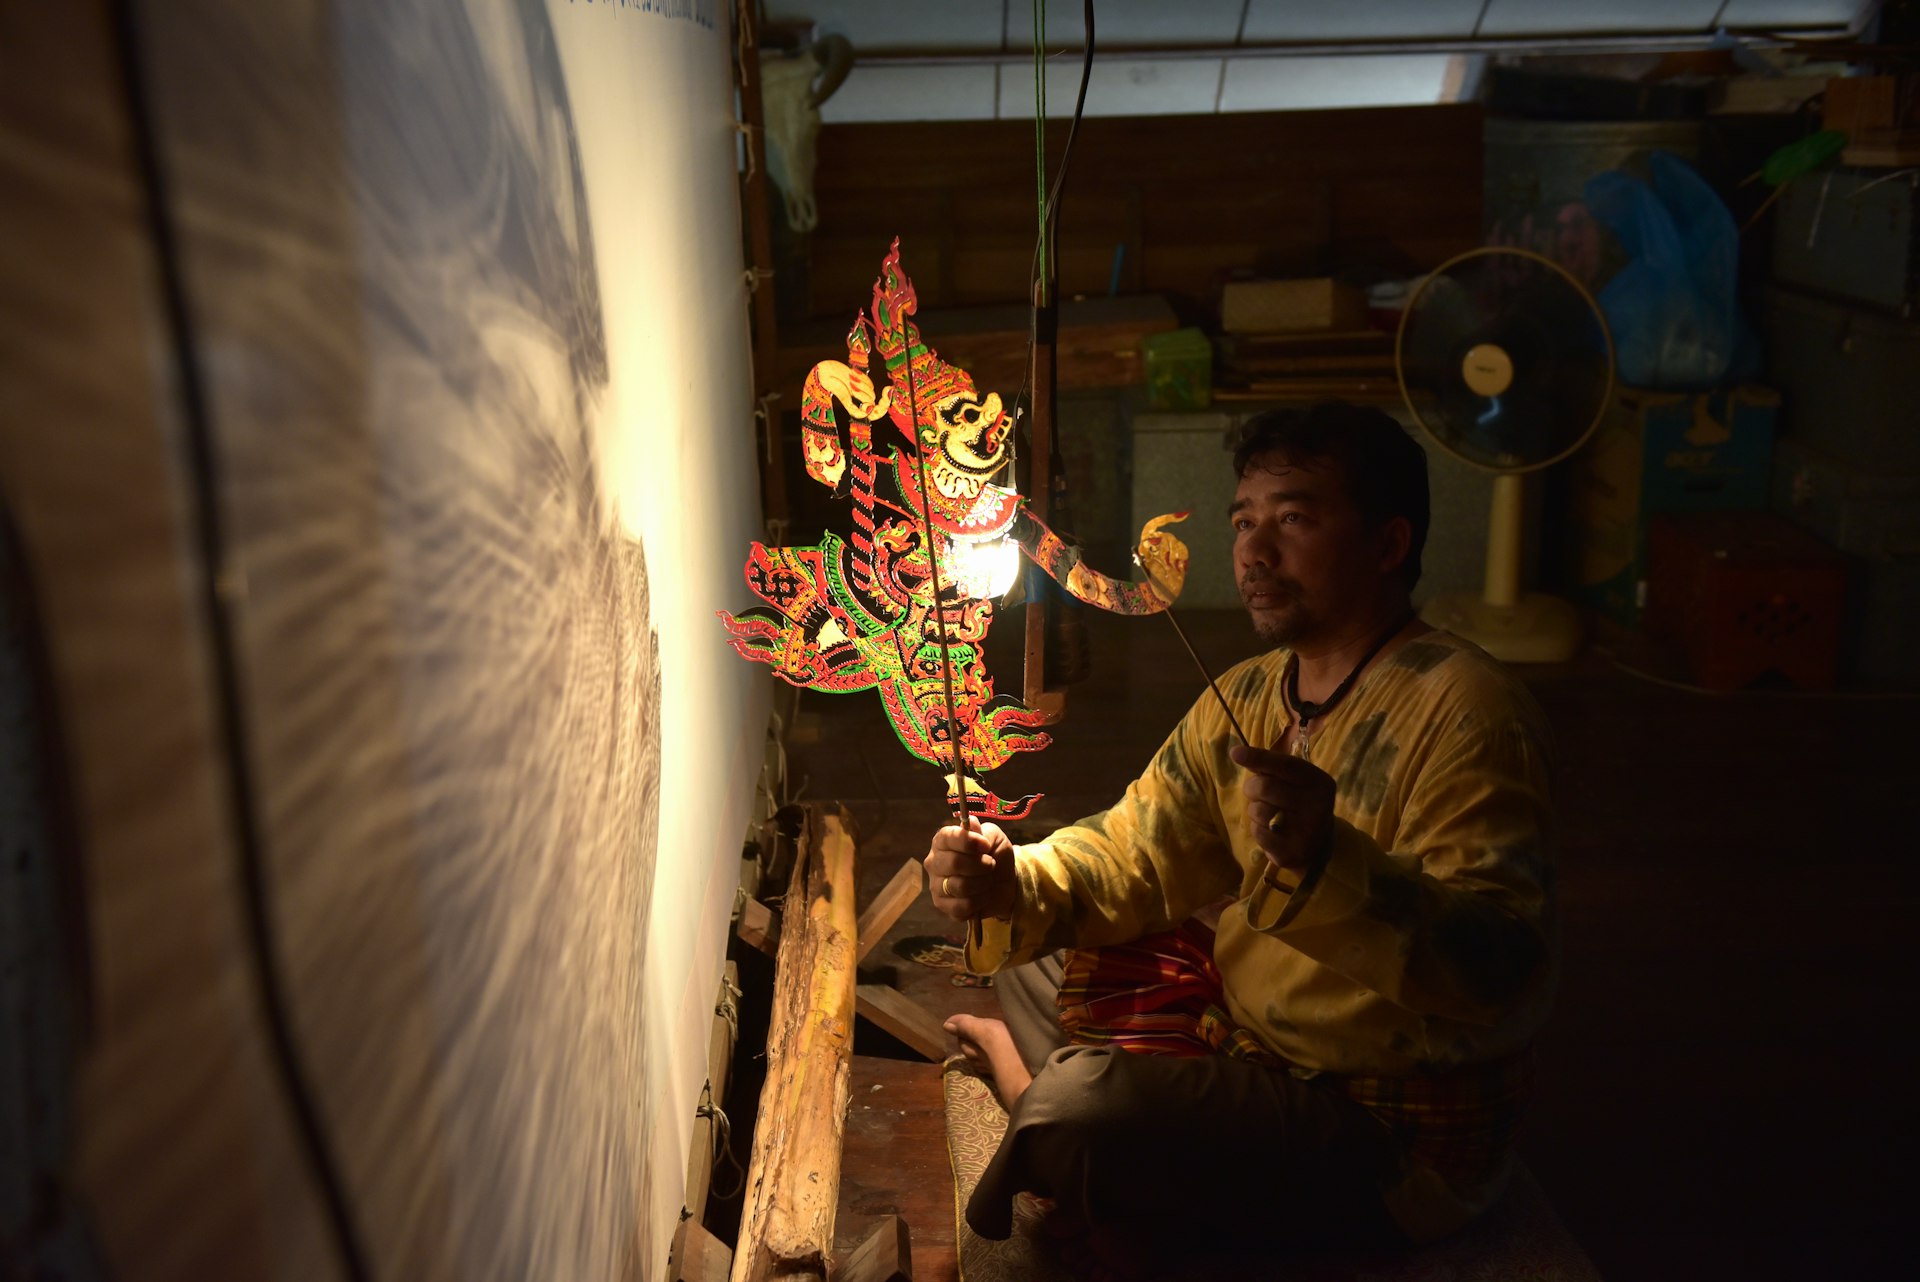 A man performs traditional Nang Talung shadow puppetry, Thailand